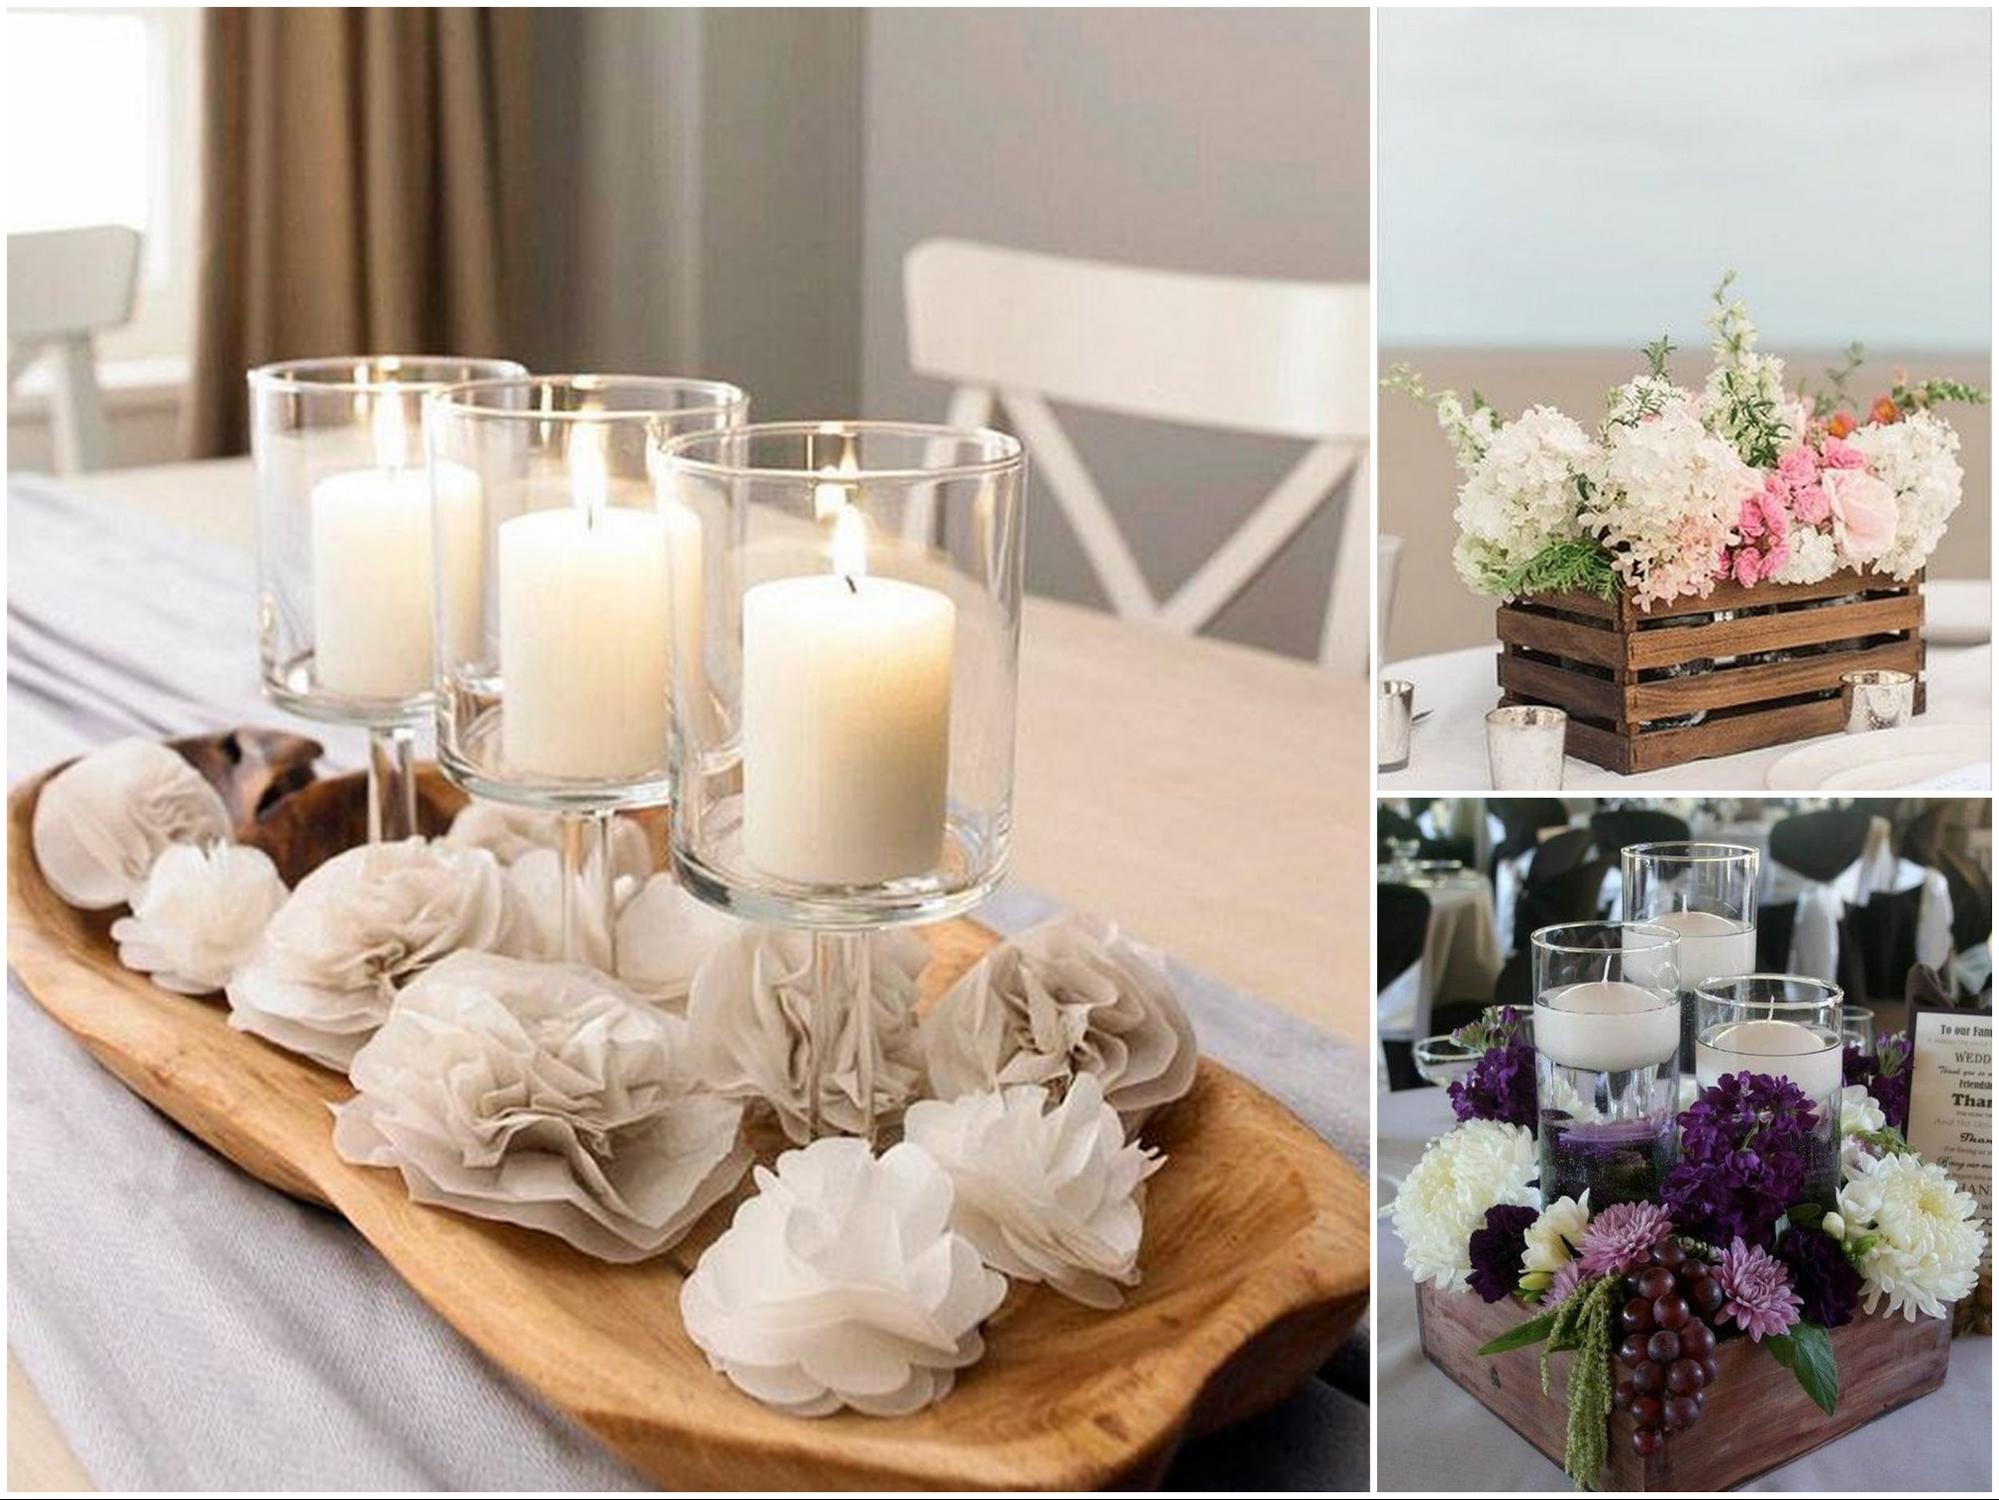 How to Make a DIY Wood Table Centerpiece for Flowers - TheDIYPlan